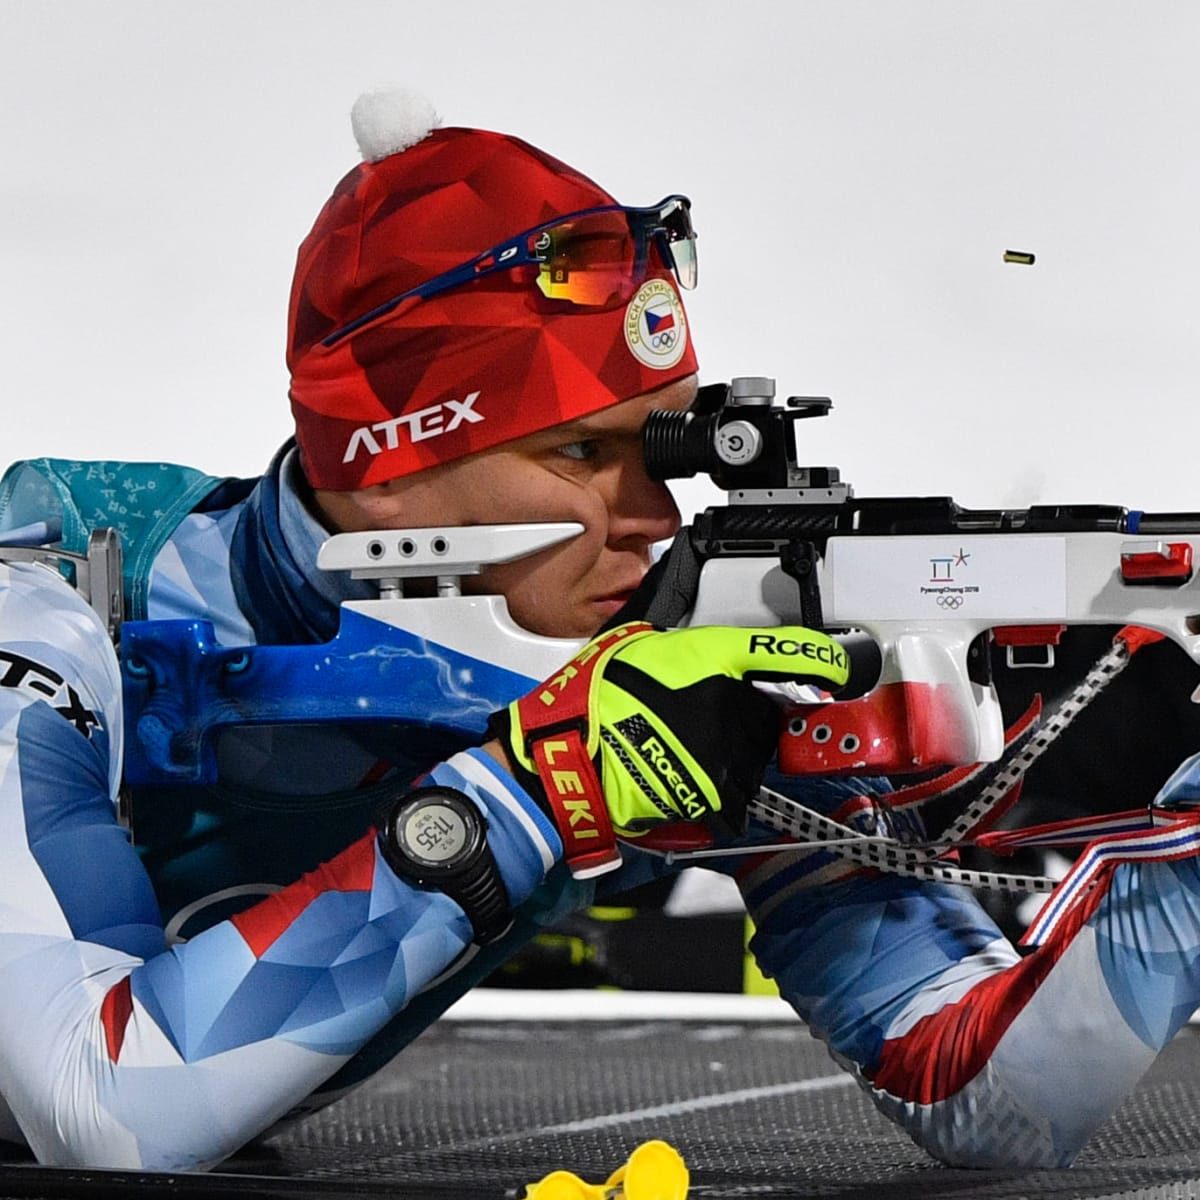 How far do they shoot in biathlon? Distance of shot